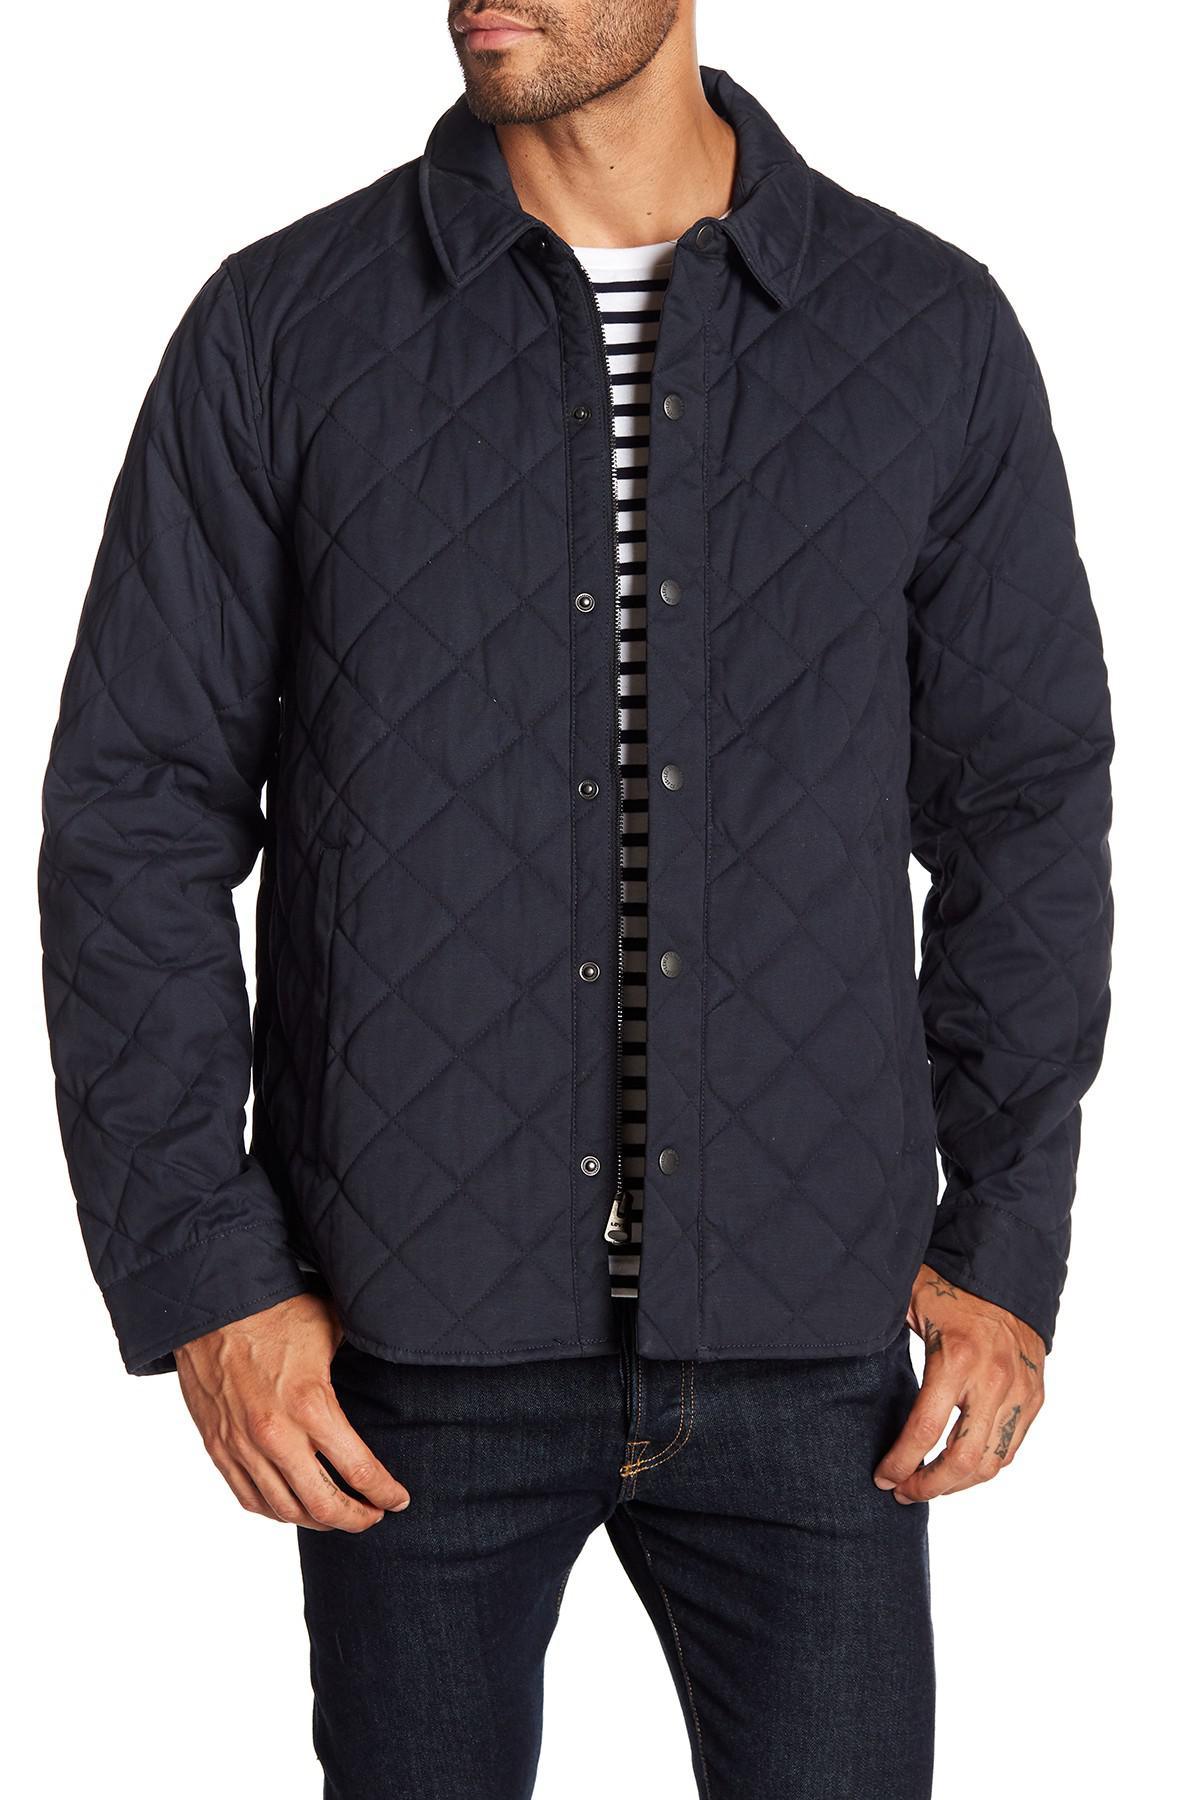 Levi's Cotton Laydown Quilted Jacket in Navy (Blue) for Men - Lyst